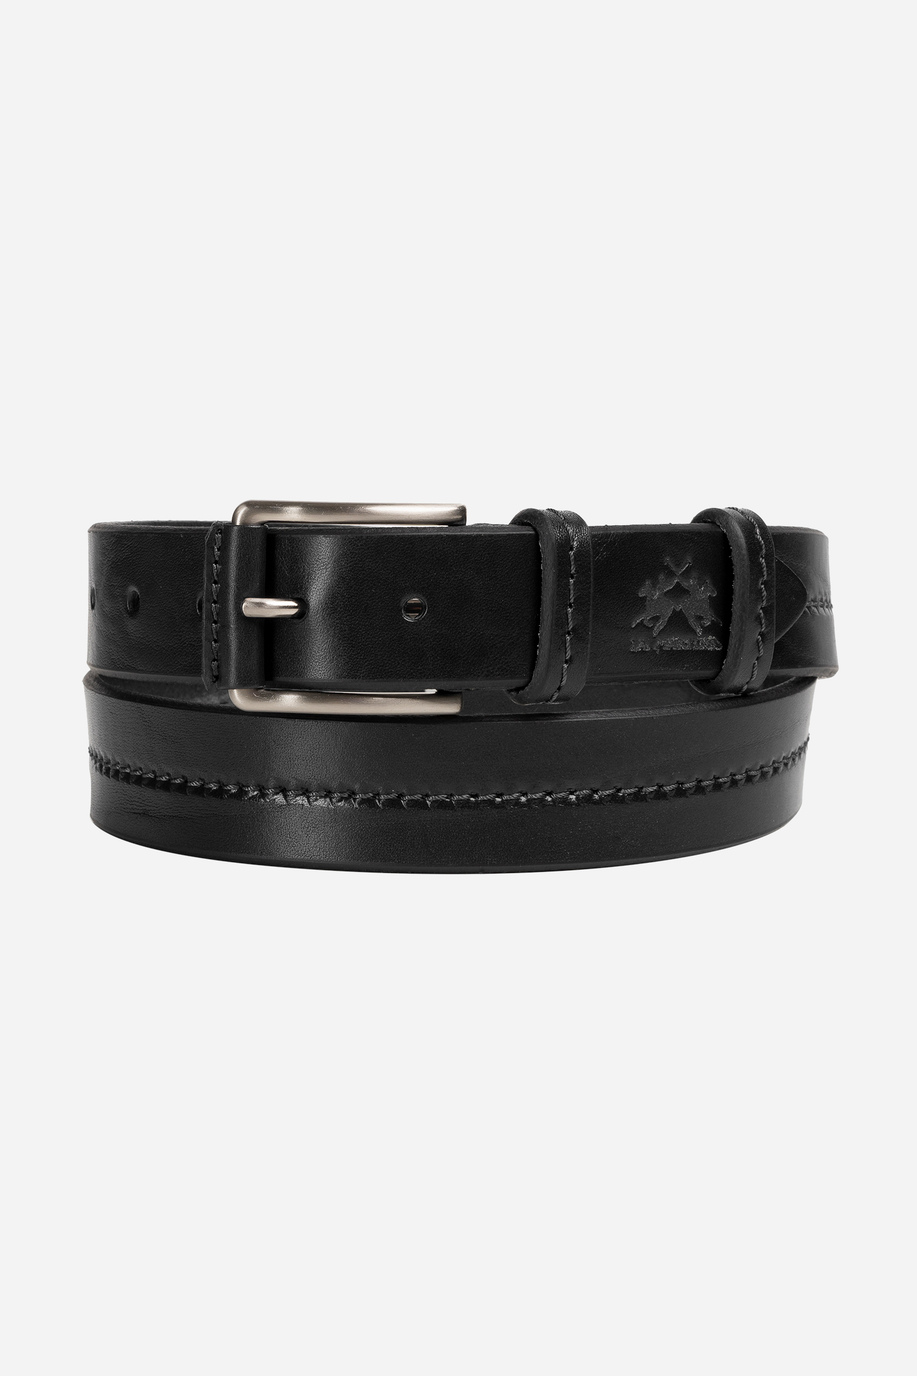 Men's belts by La Martina: discover the online collection